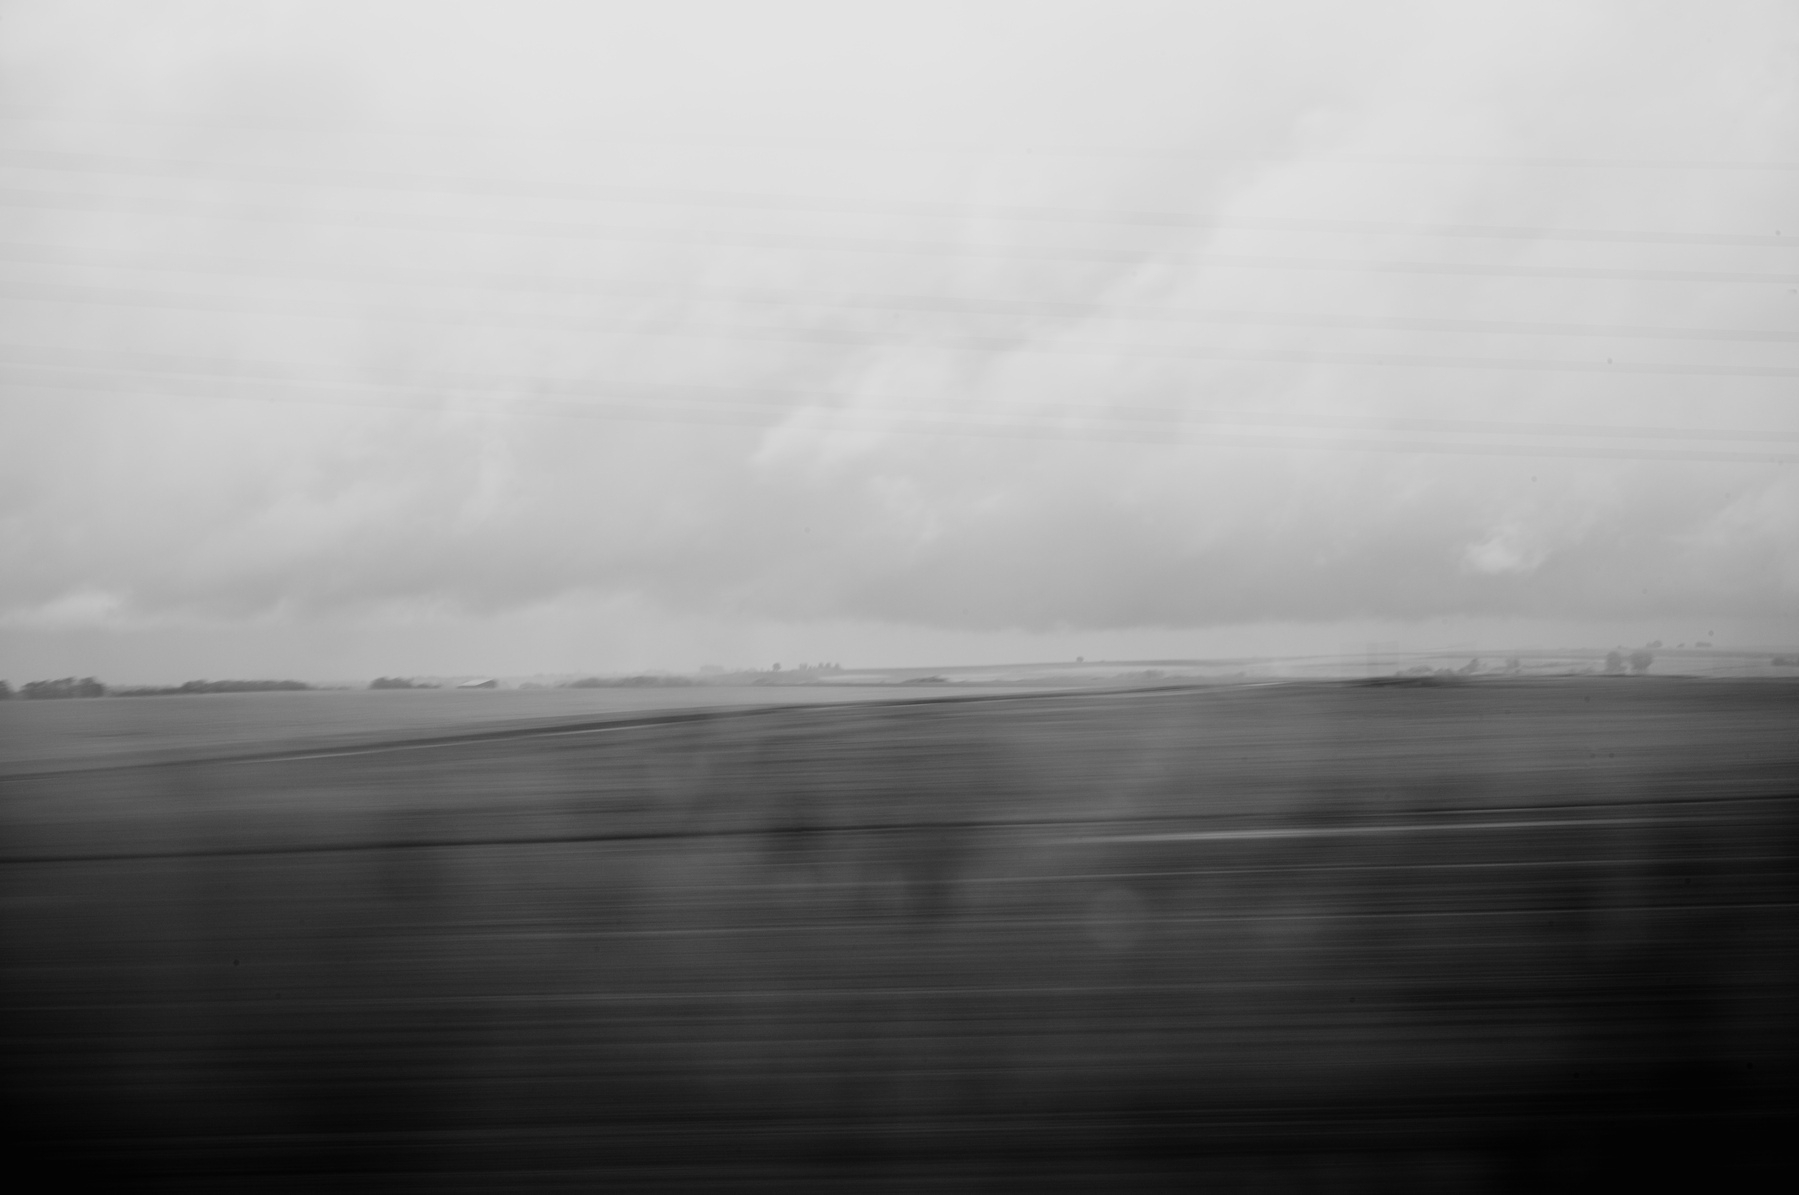 Blurry, rainy landscape through a train window in black and white